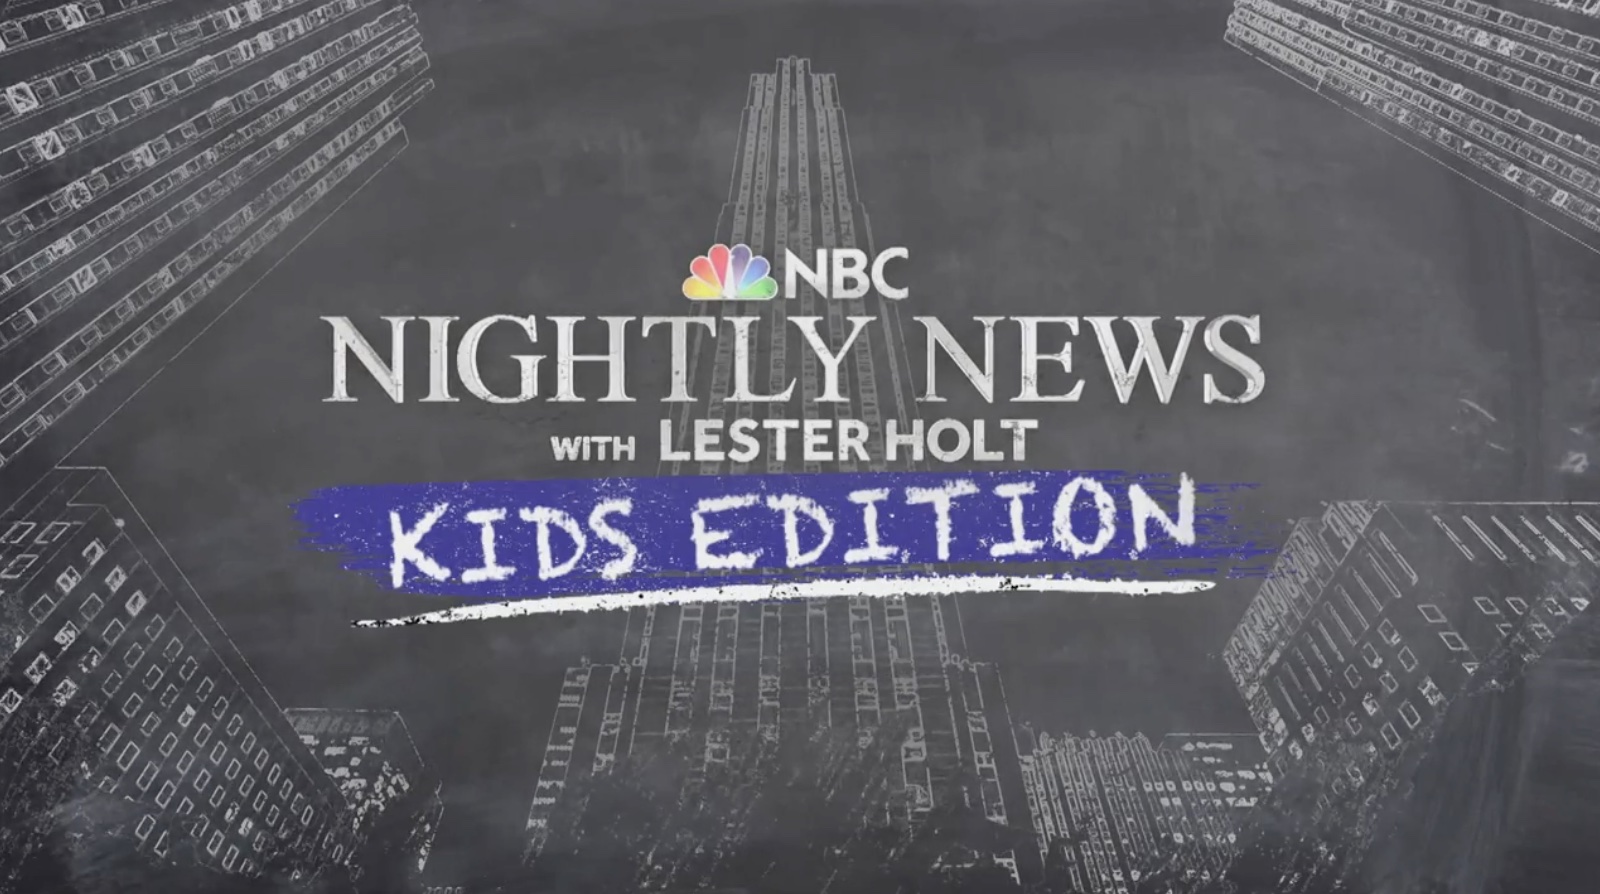 Great news podcasts for kids: NBC Nightly News with Lester Holt, Kids Edition